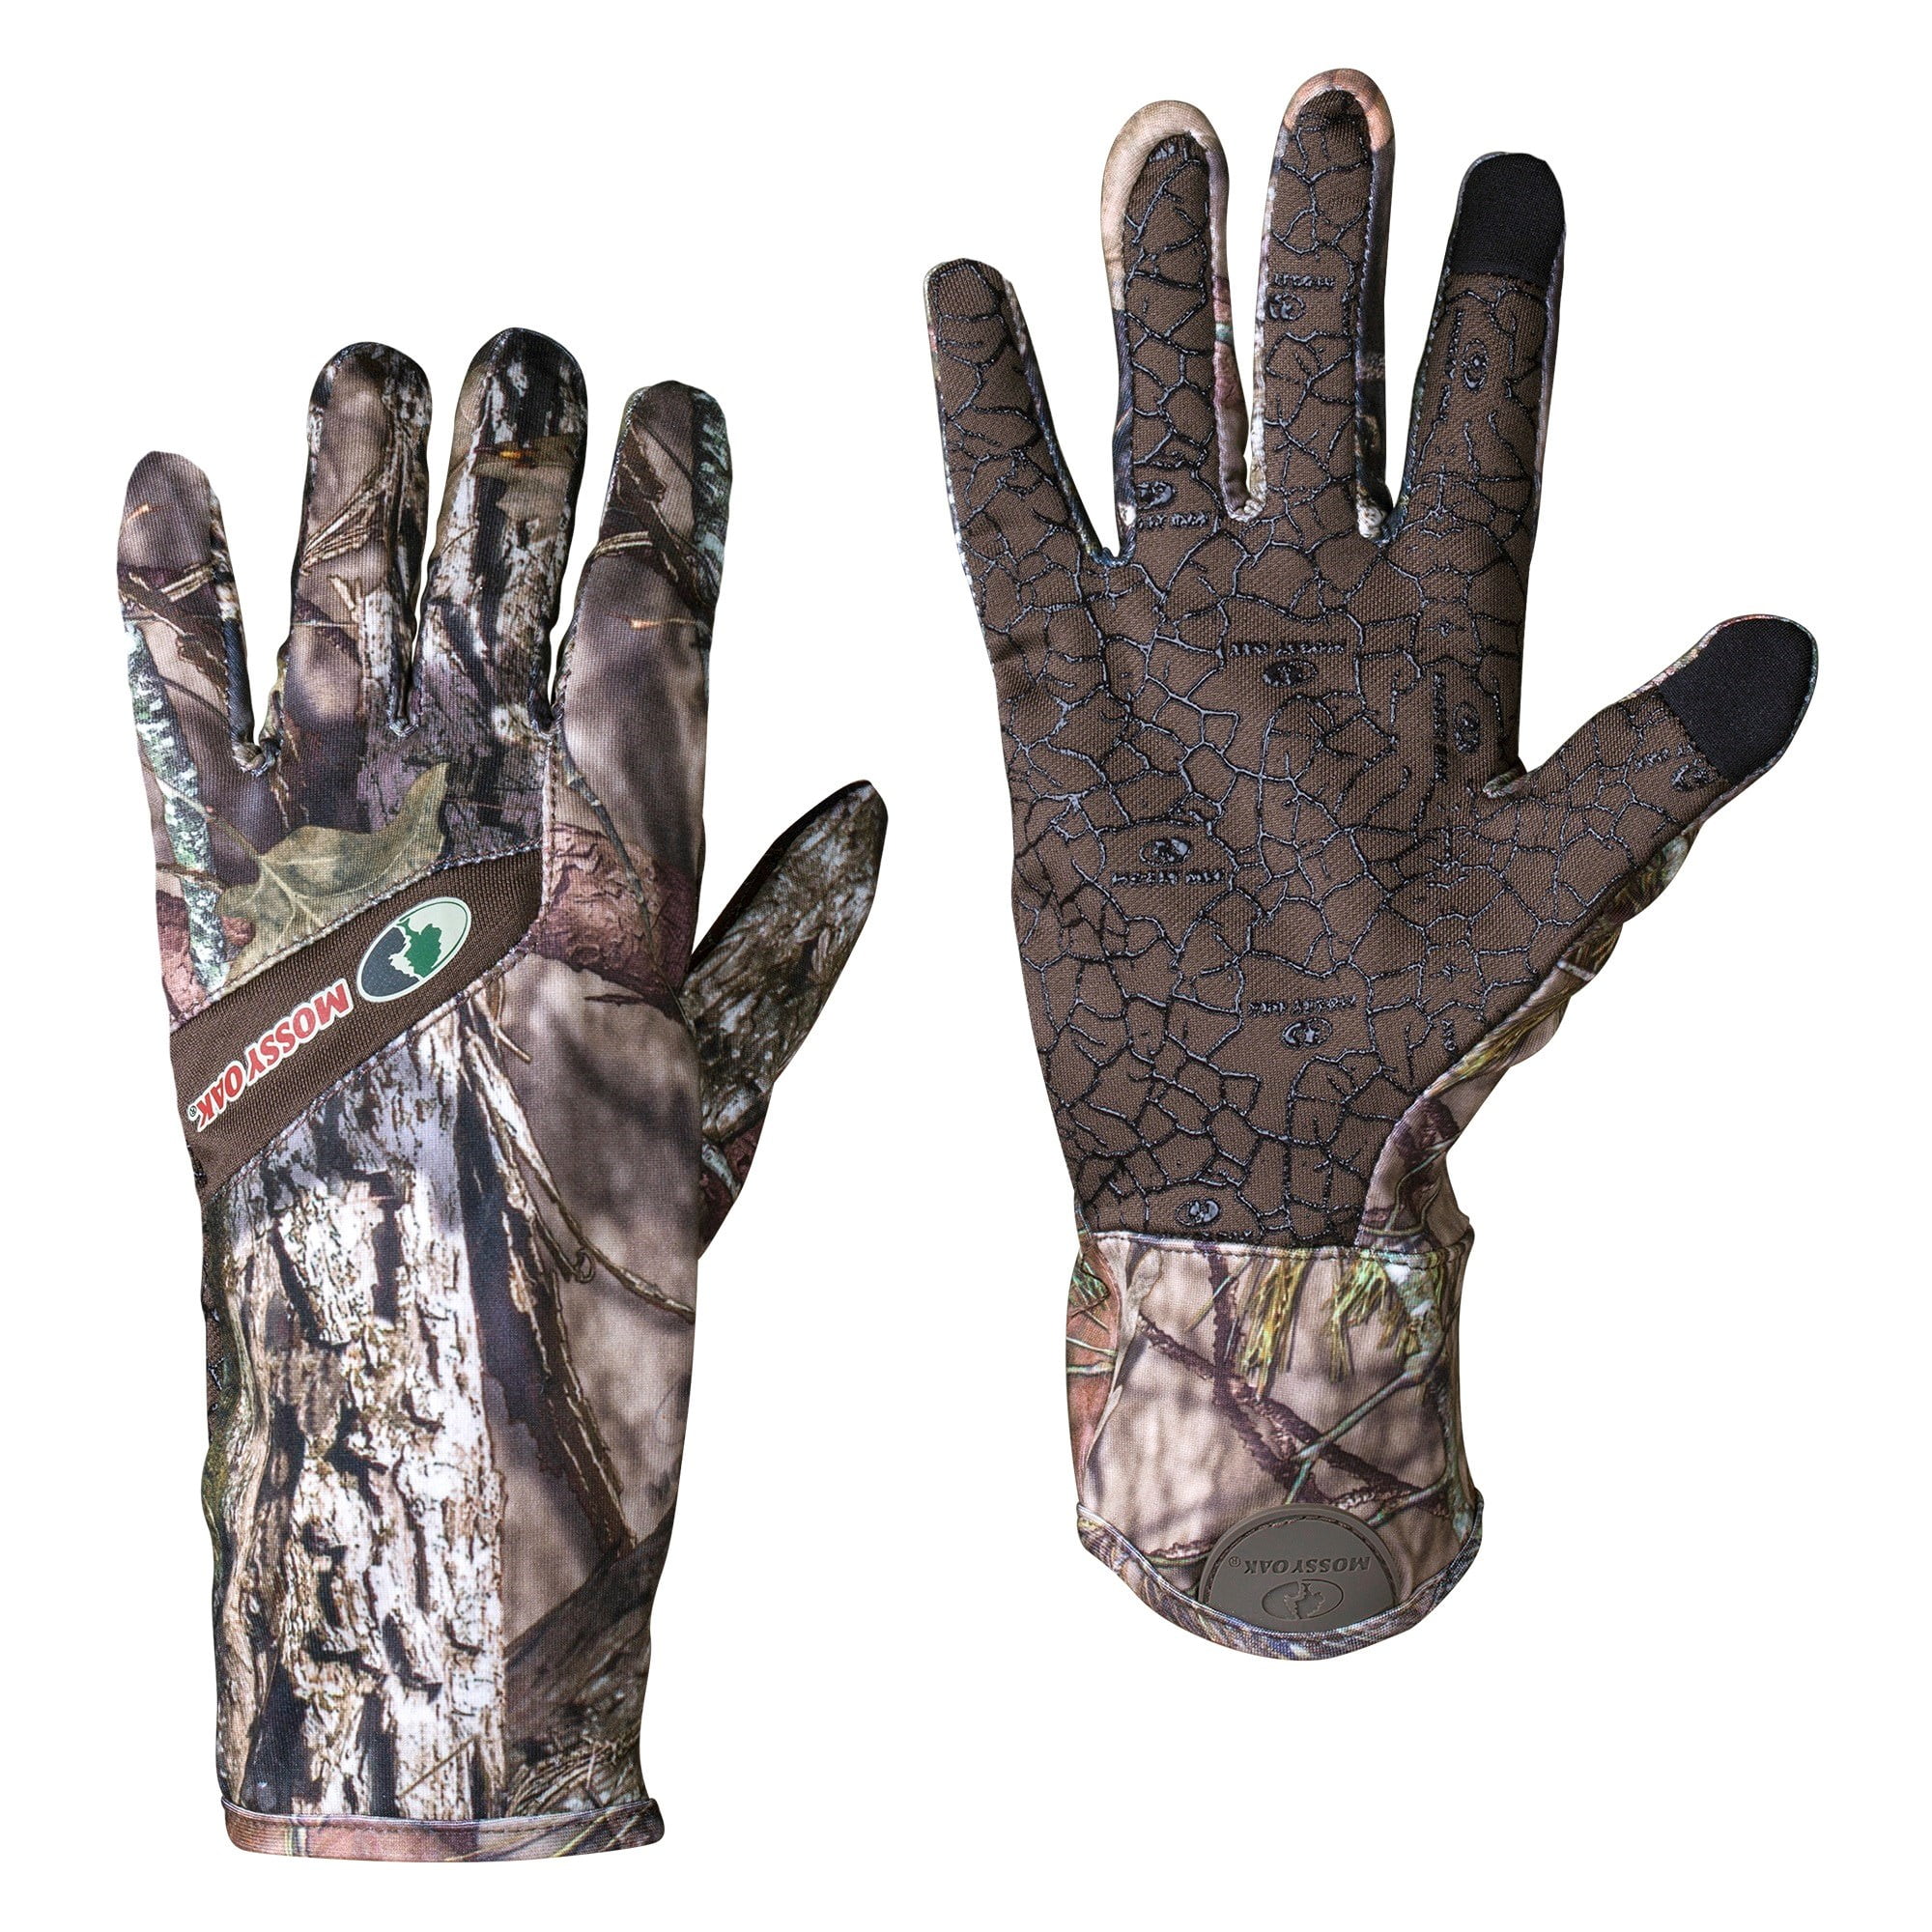 NEW Mens Mossy Oak Break-Up Country Camouflage Hunting Gloves Thinsulate 40g 